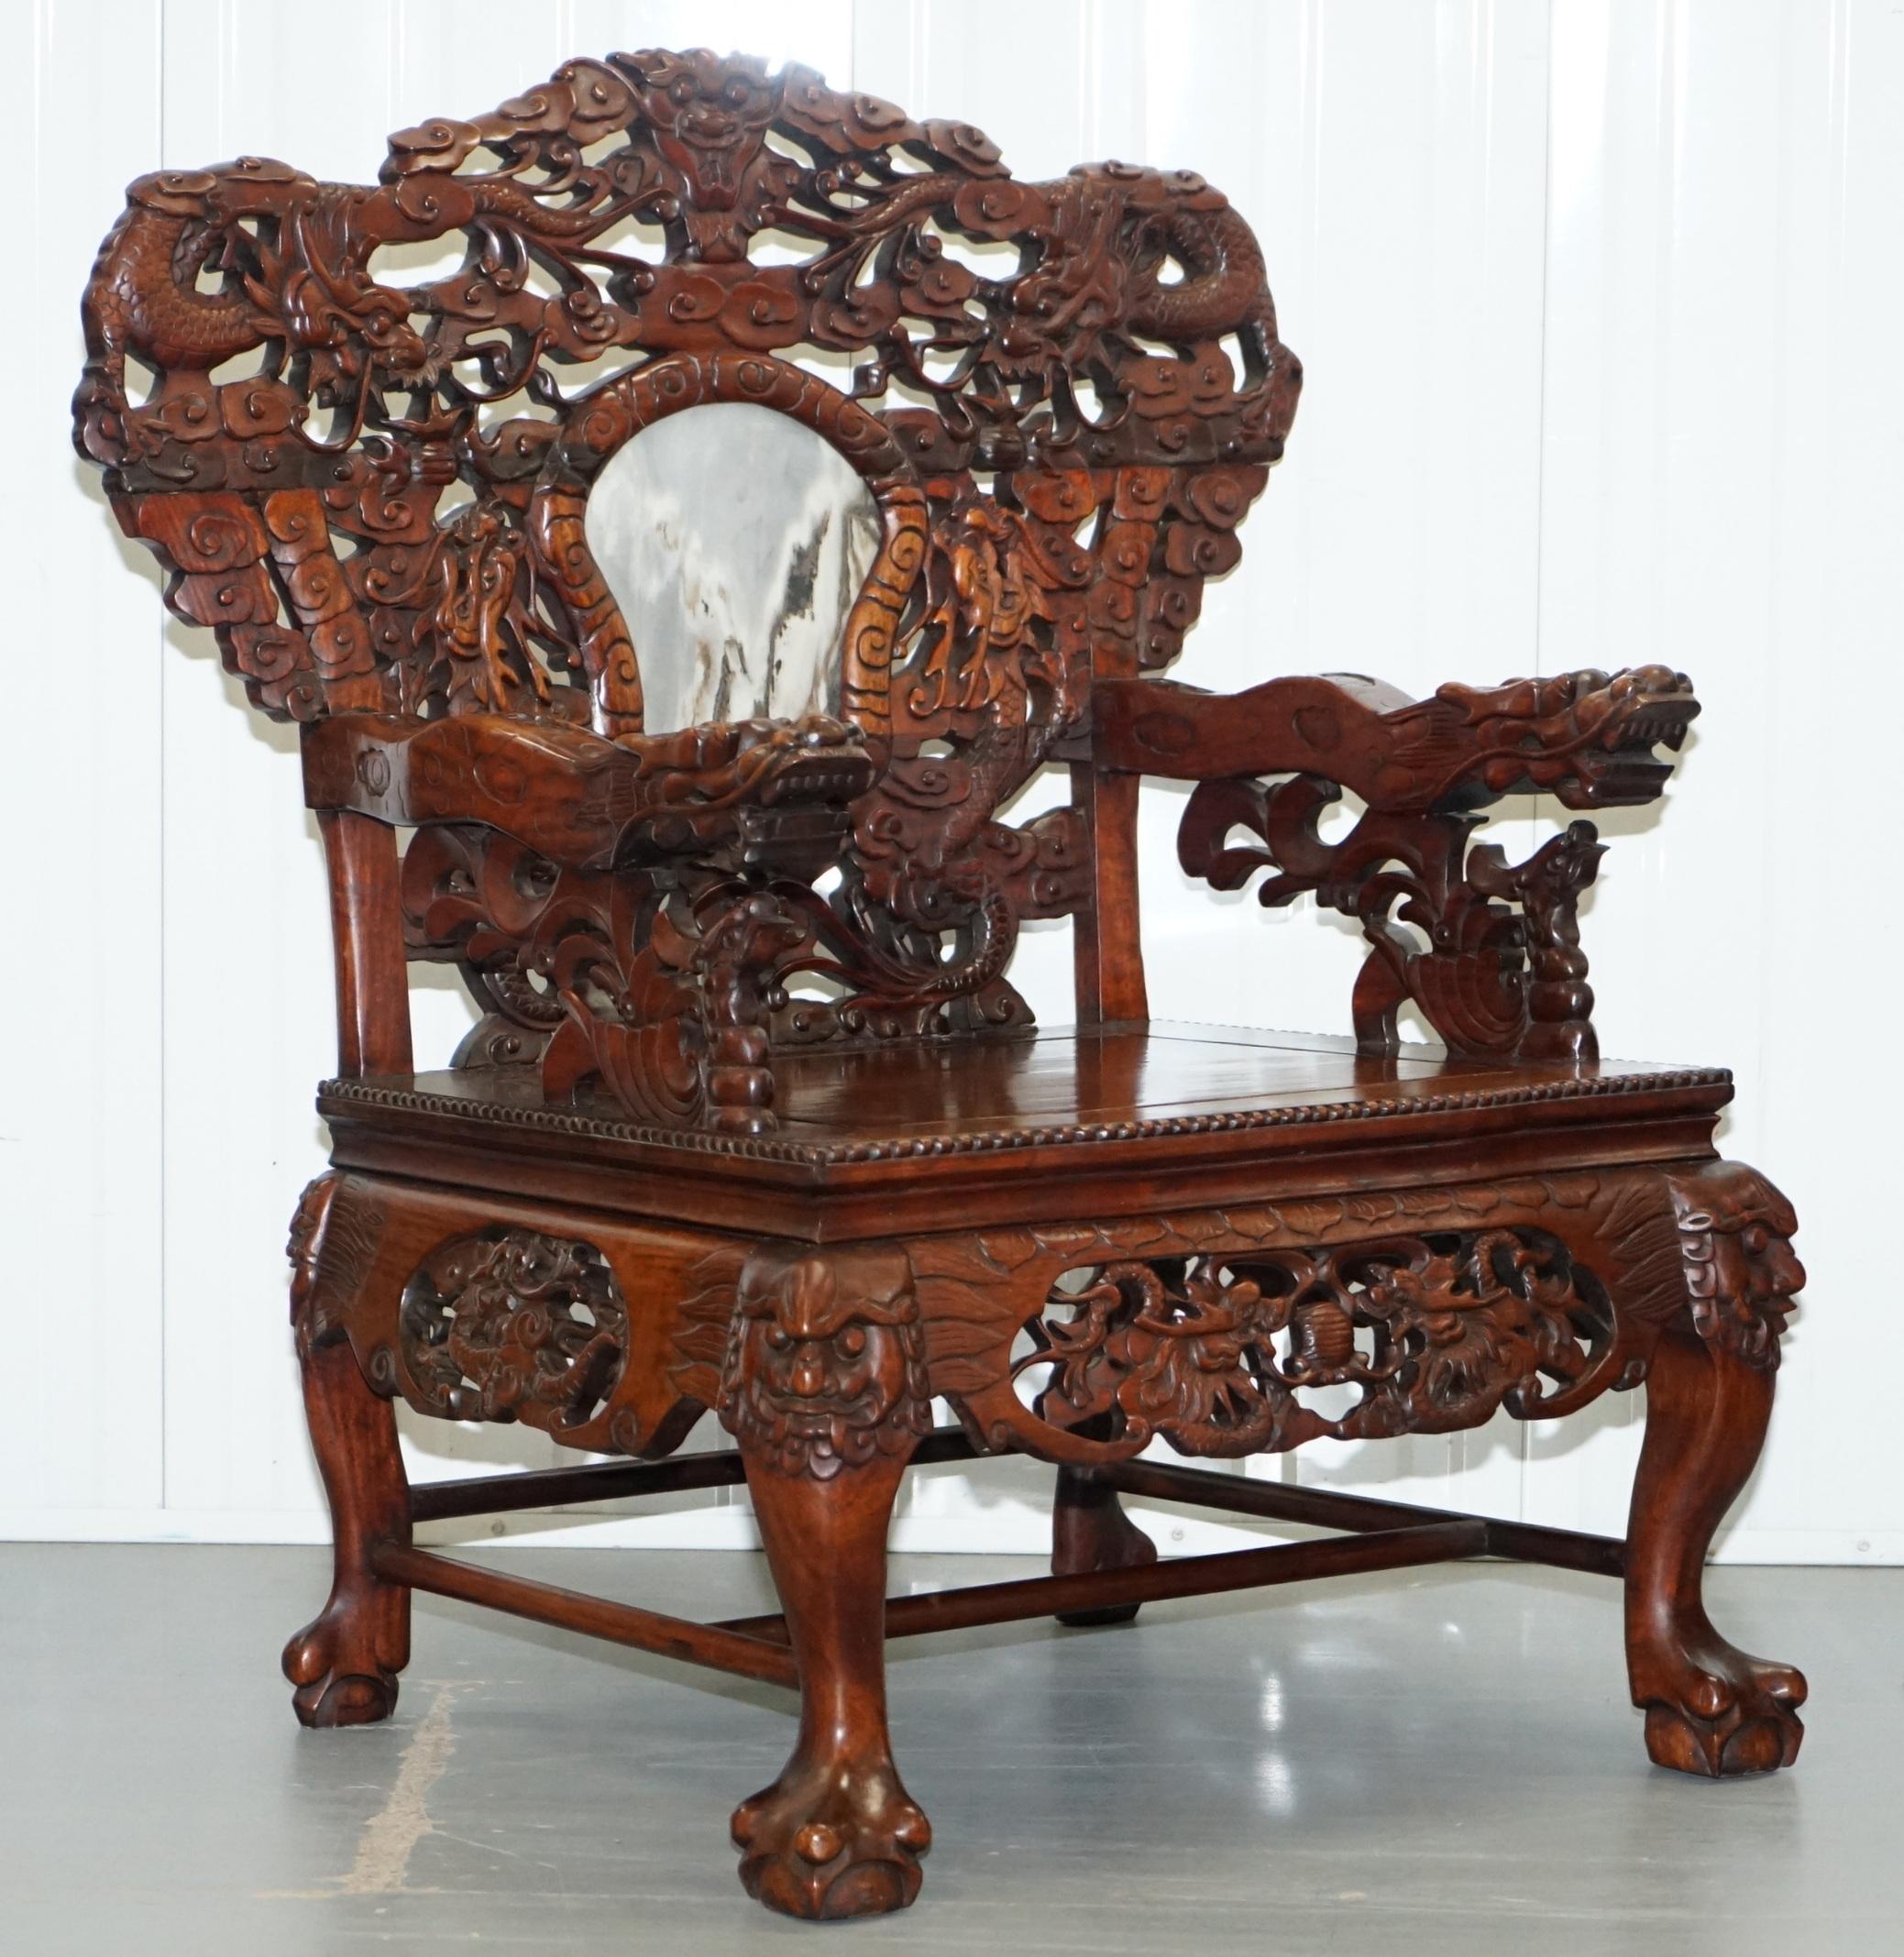 We are delighted to offer for sale this very rare pair of stunning hand carved solid Elm lacquered throne armchairs with marble backrests and ornate dragon detailing 

A really rare and expertly hand carved pair, the detail is never ending and of